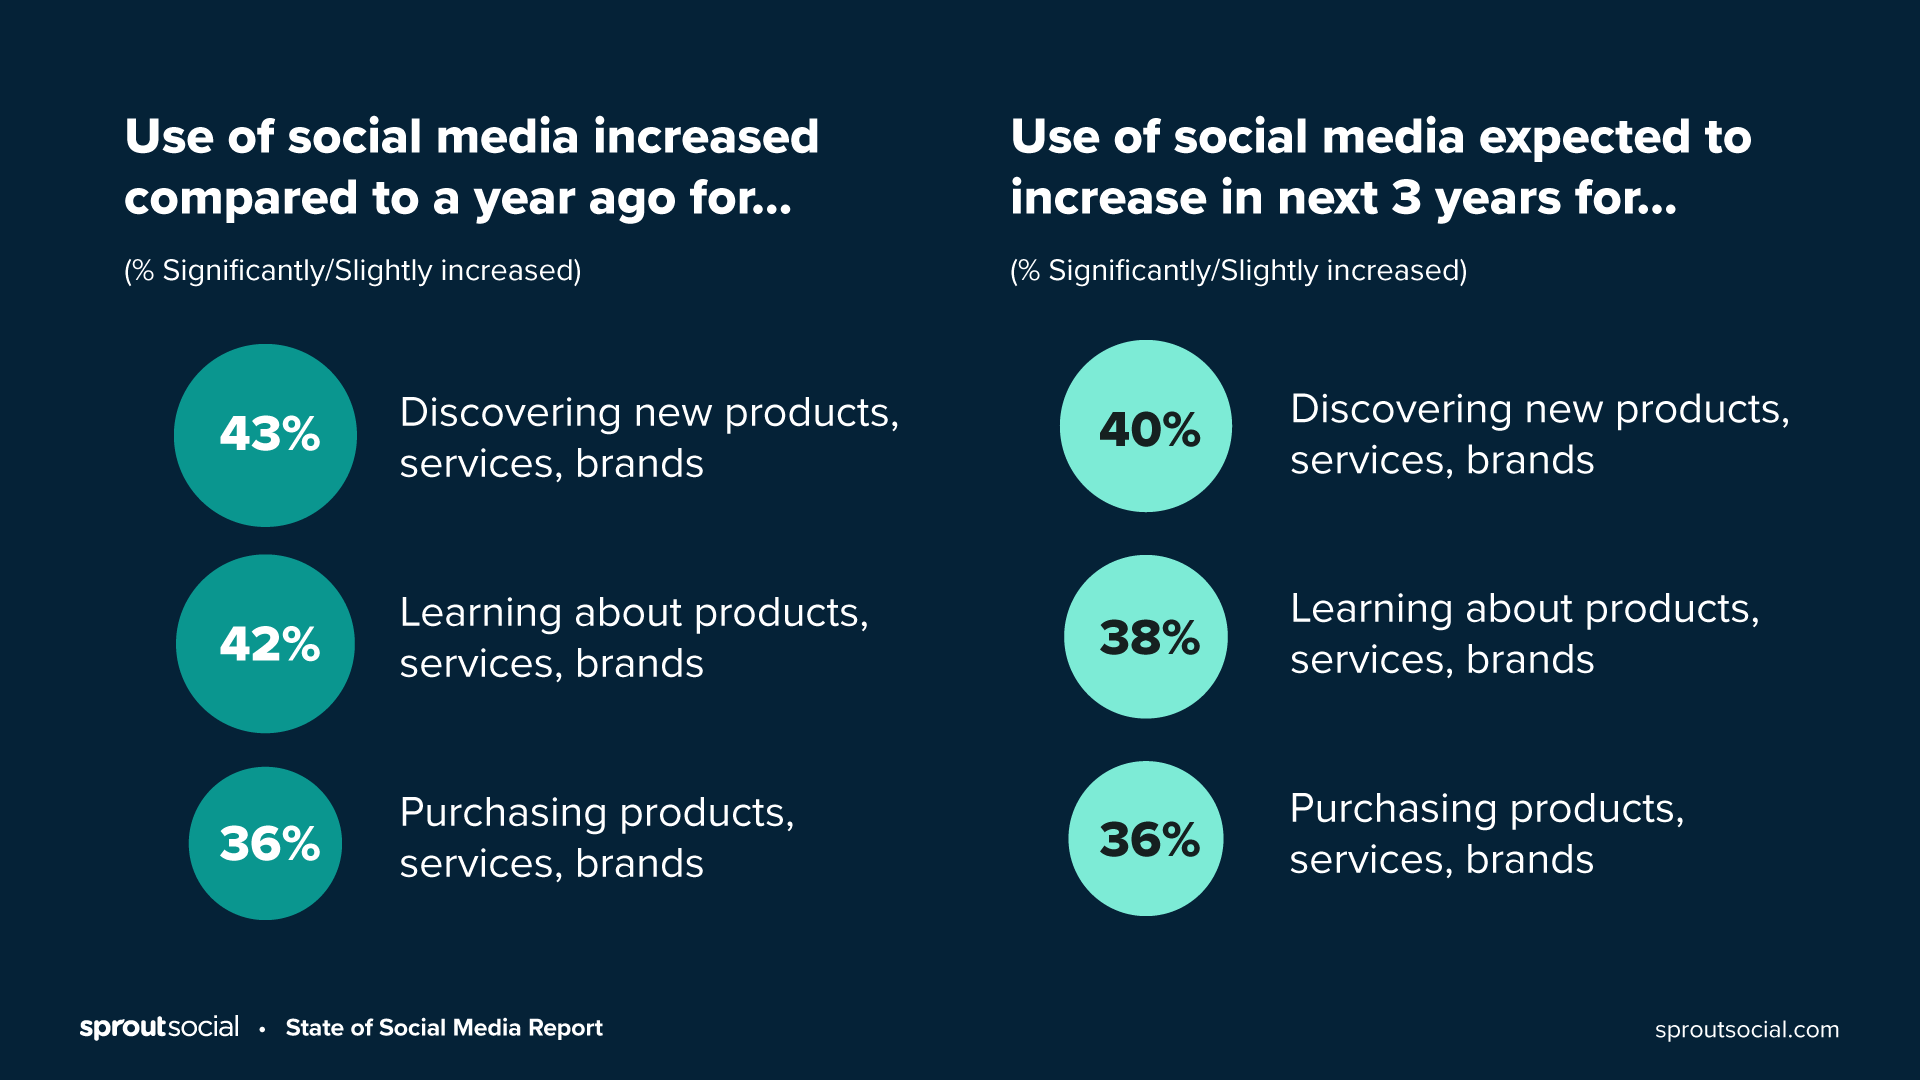 how the use of social media has increased and changed over time